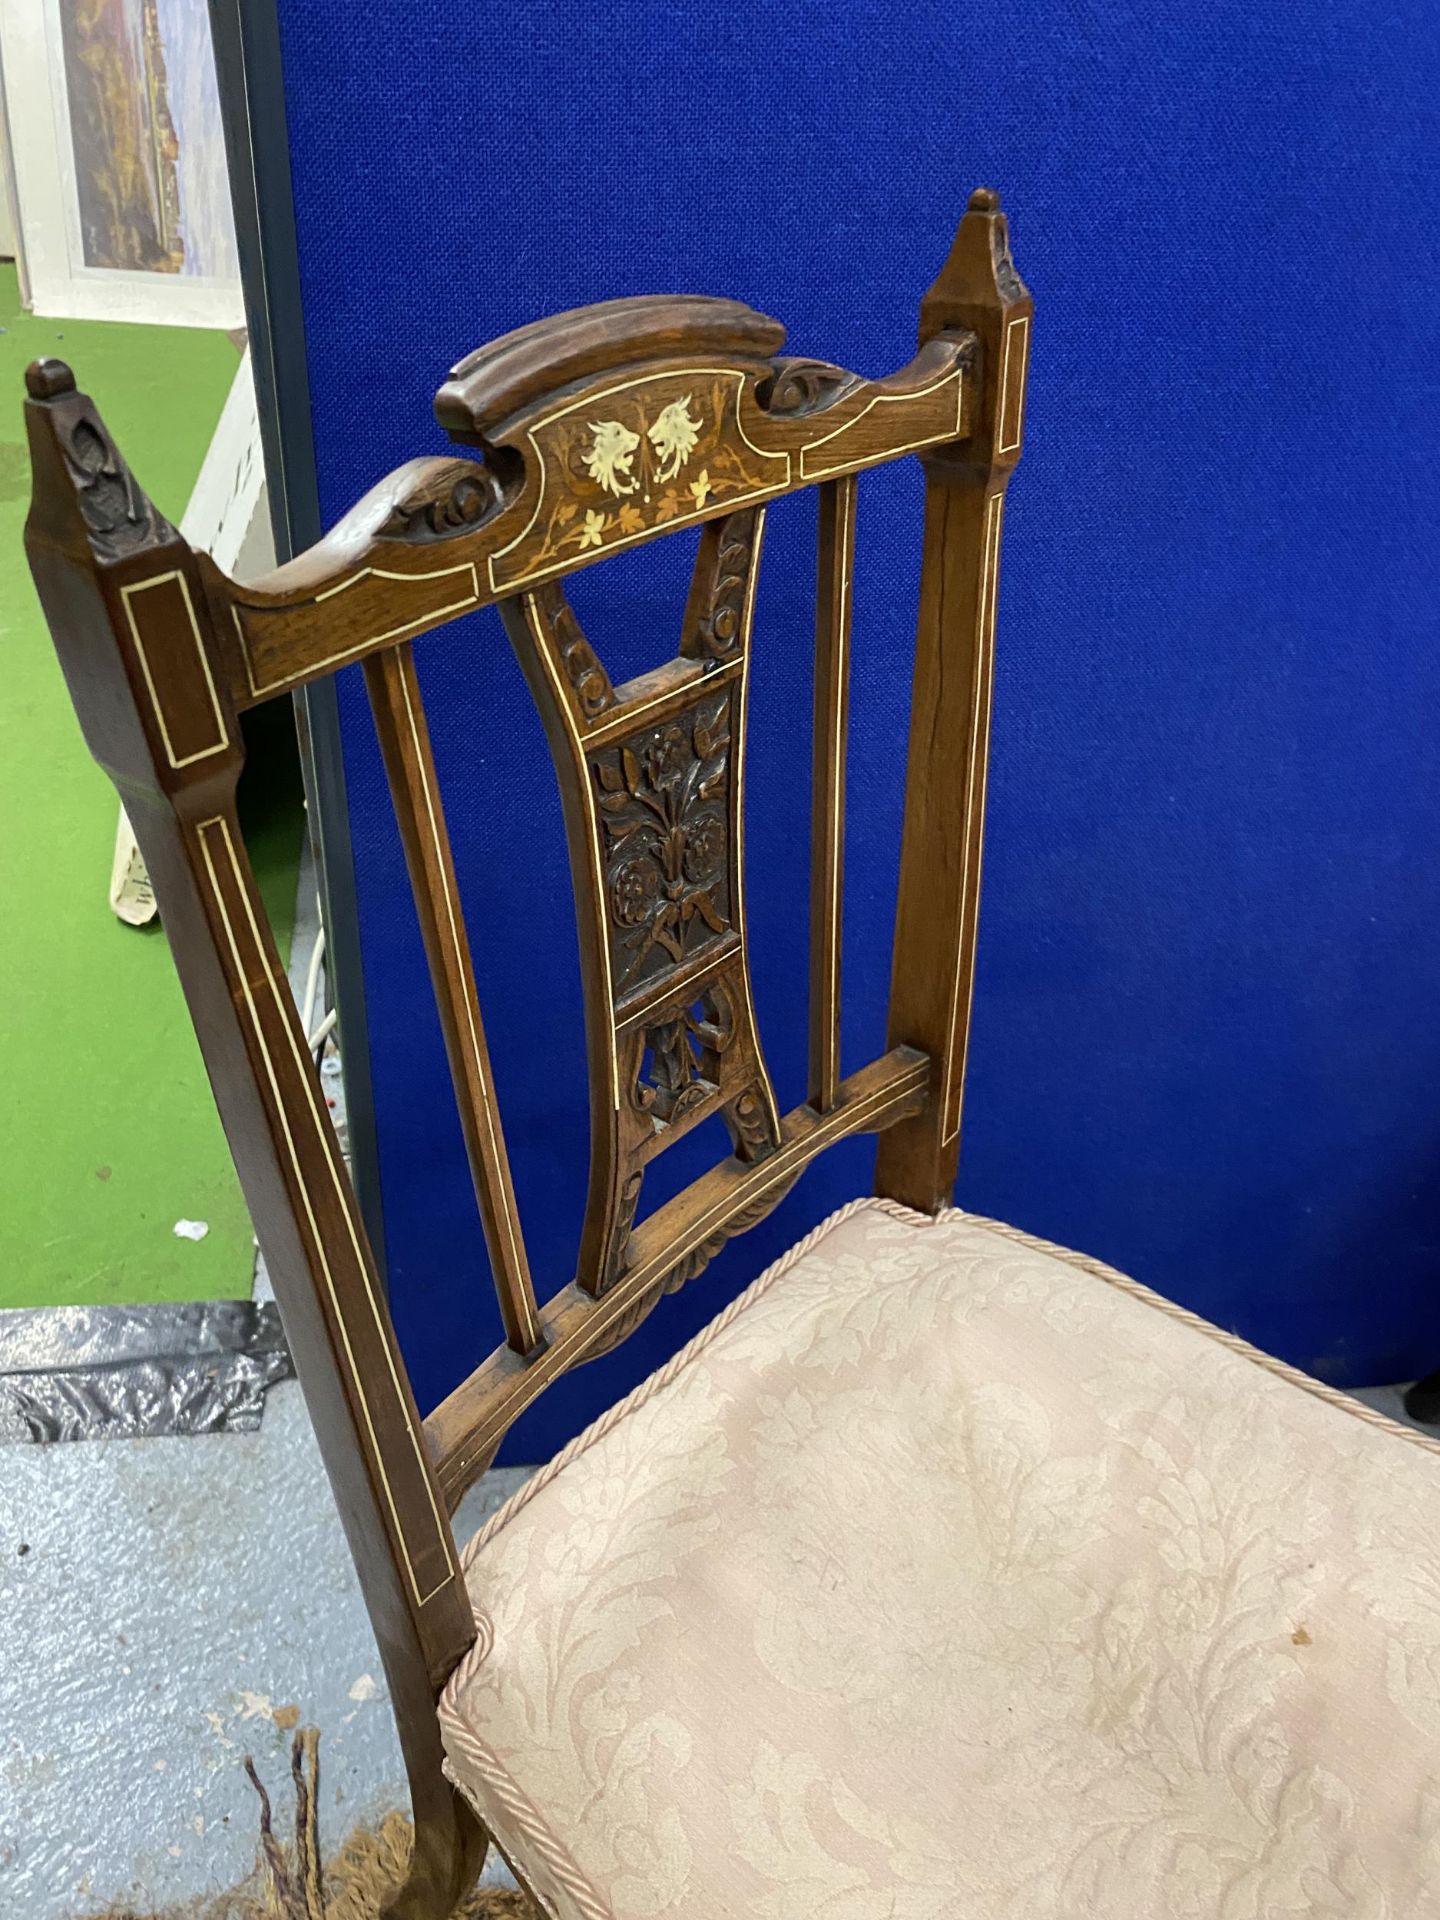 A PAIR OF EDWARDIAN INLAID BEDROOM CHAIRS - Image 2 of 4